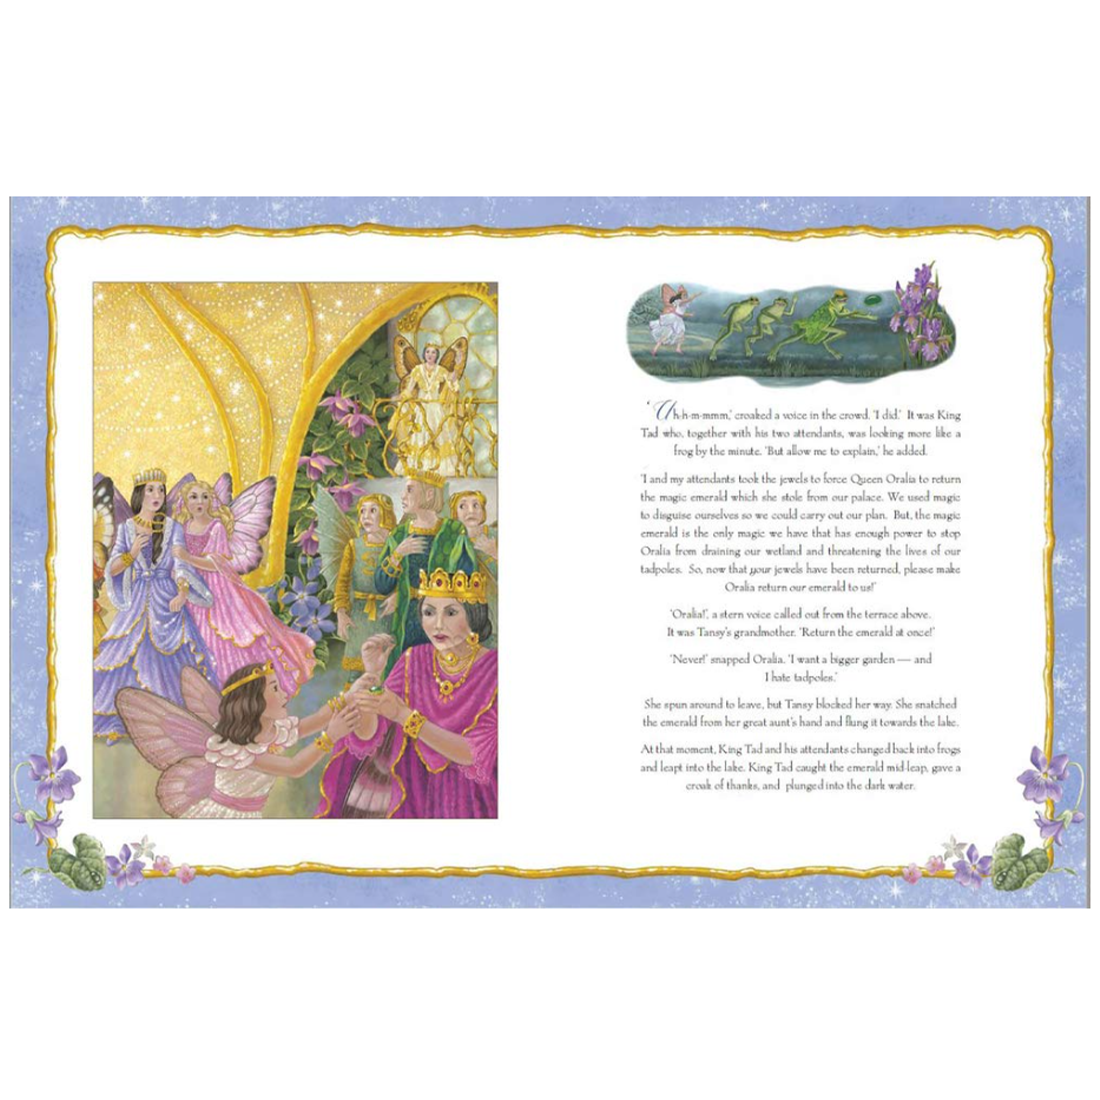 The Jewels of Fairyland Hardback Book by Shirley Barber